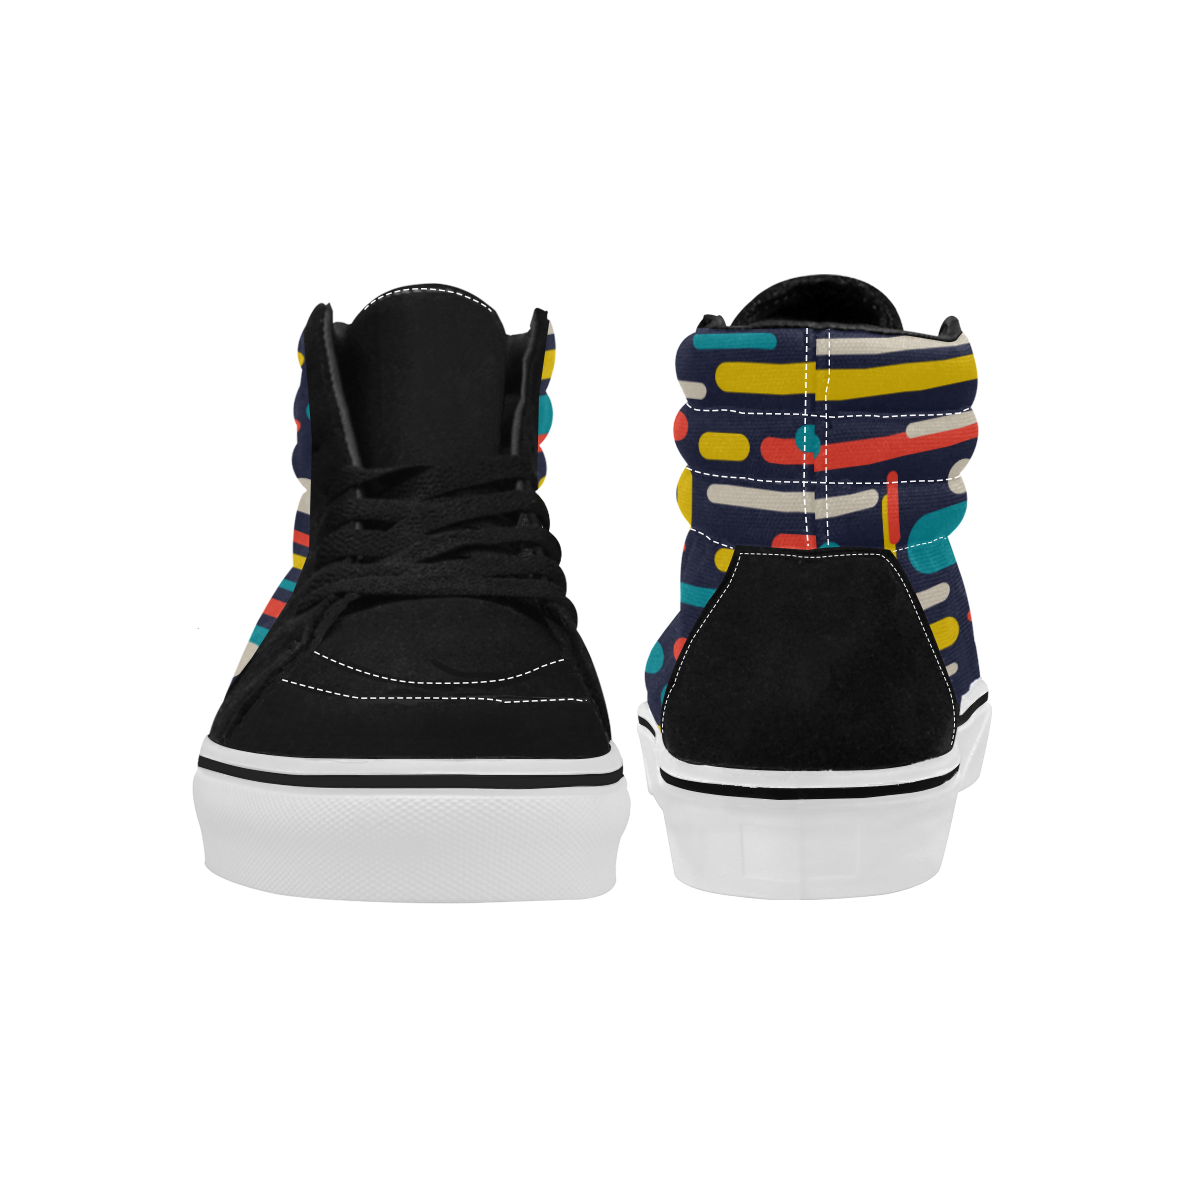 Colorful Rectangles Women's High Top Skateboarding Shoes/Large (Model E001-1)